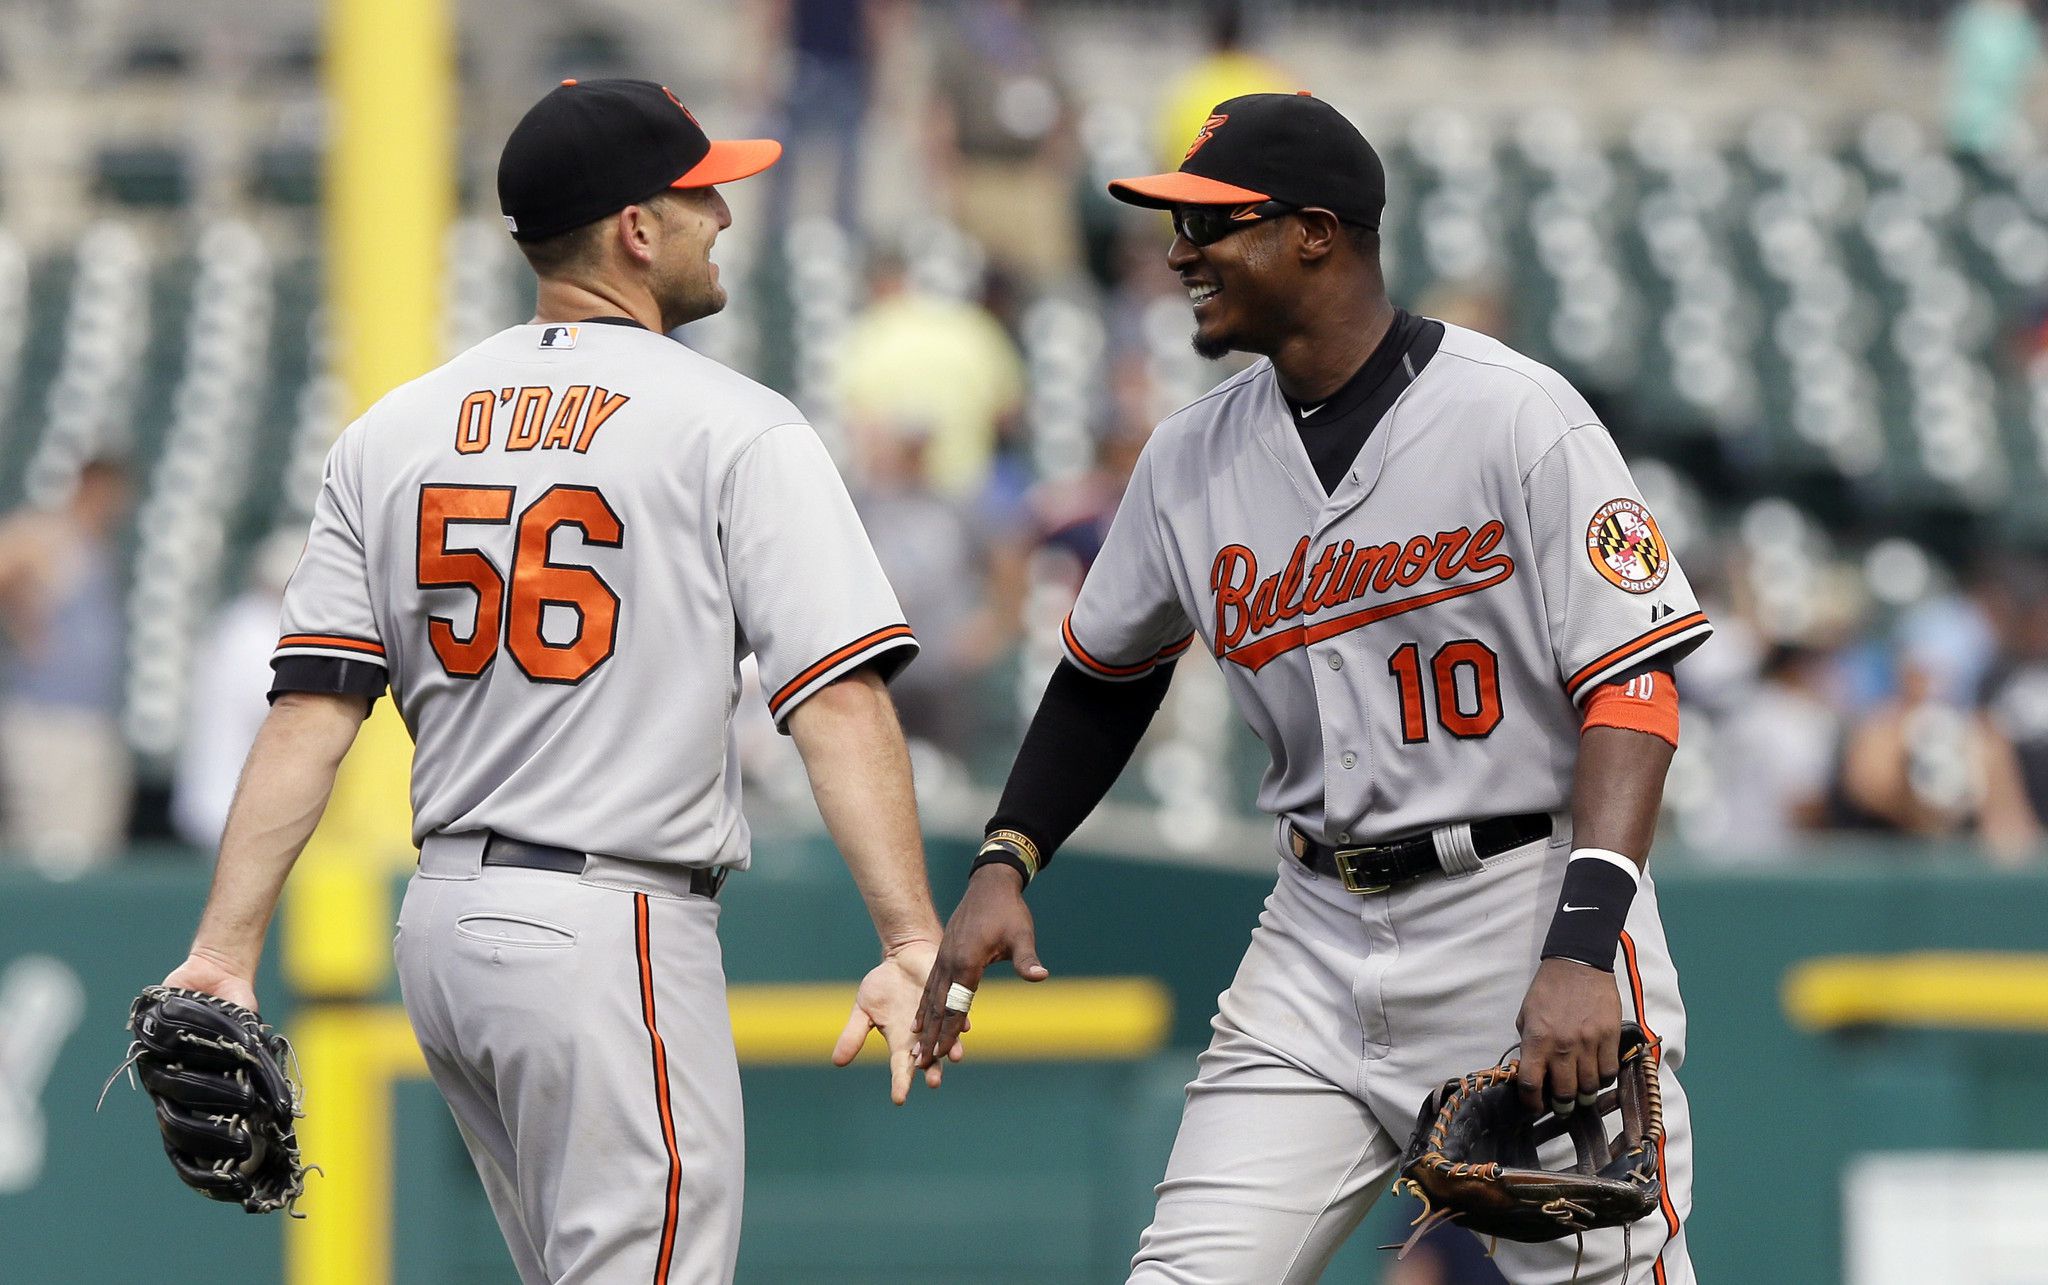 Matt Wieters accepts $15.8 million qualifying offer from Orioles